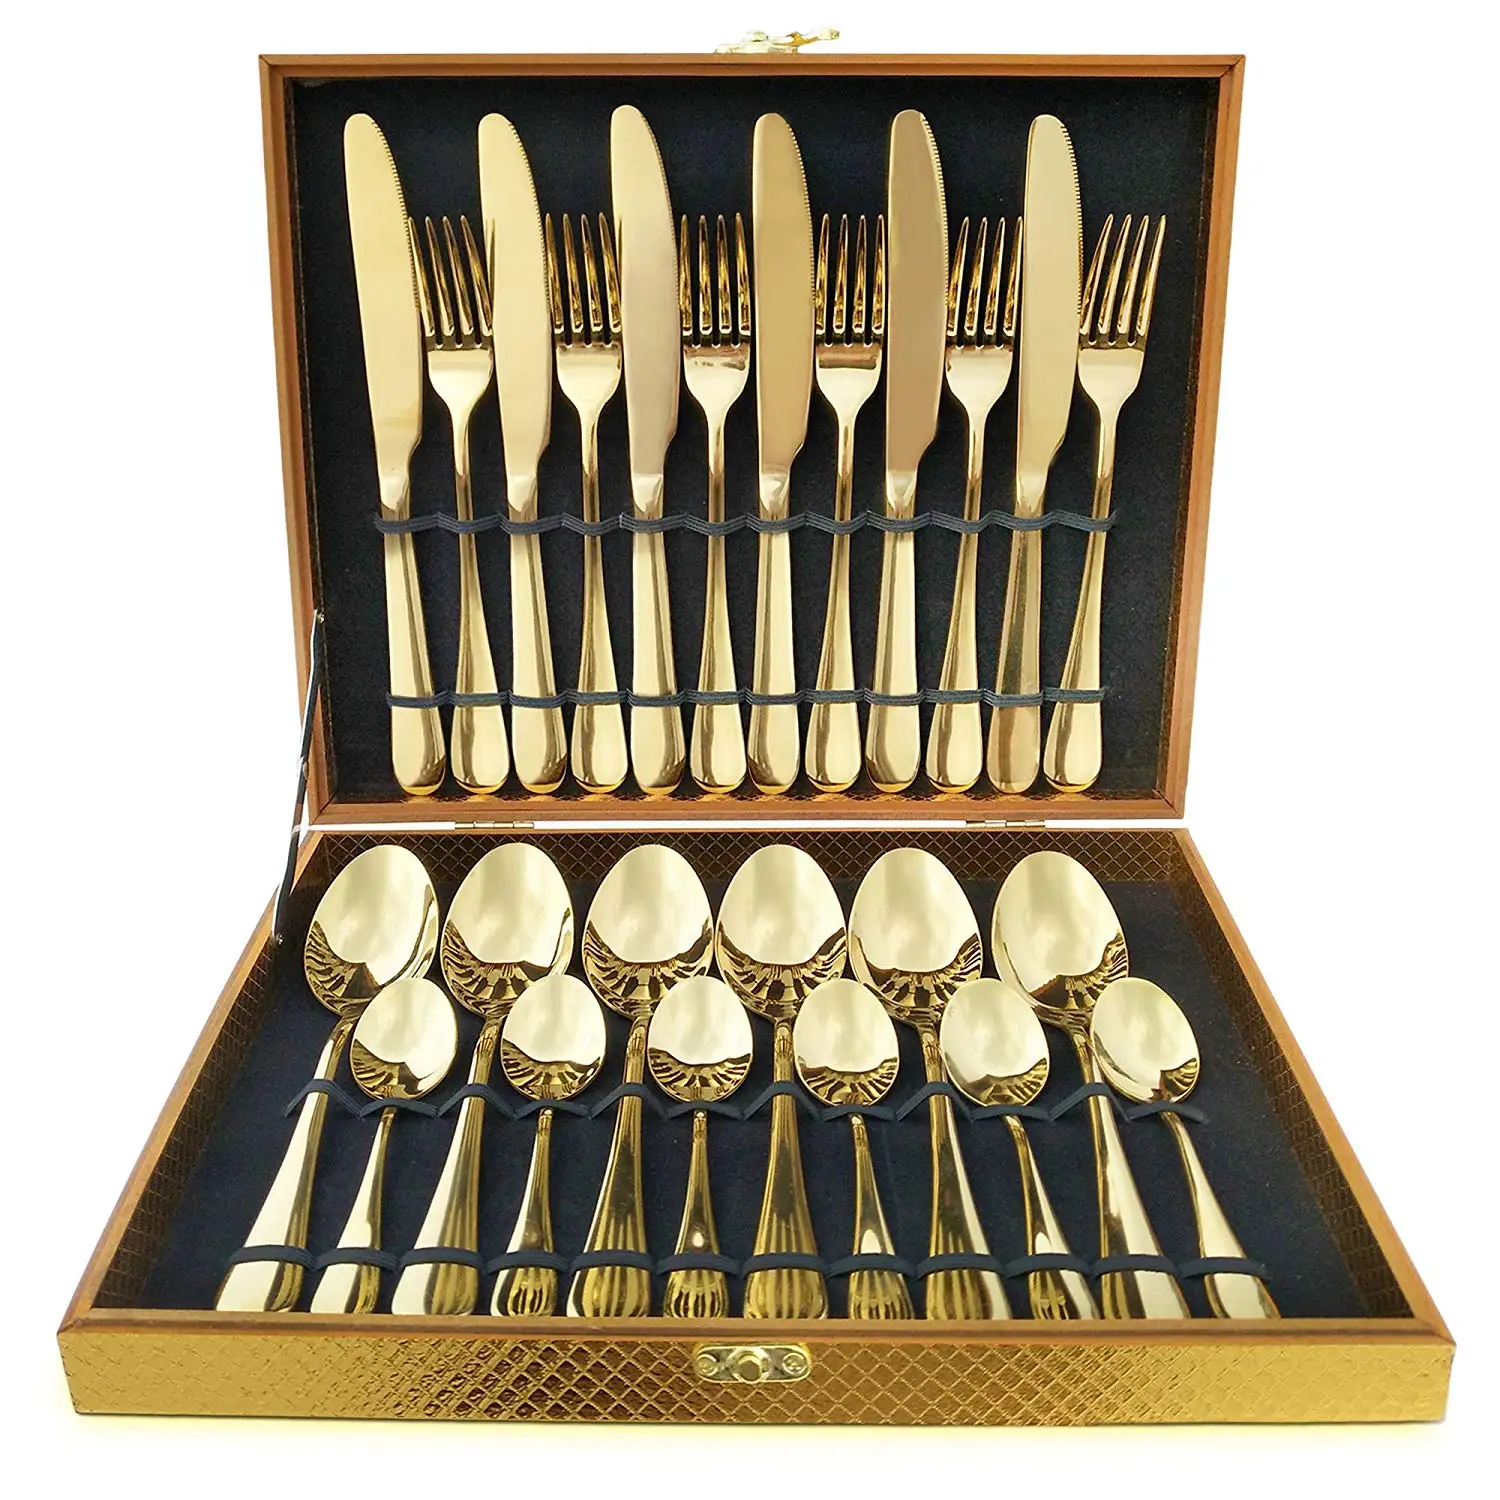 24pcs Cutlery Travel Set Stainless Steel Tableware Cutlery Set With